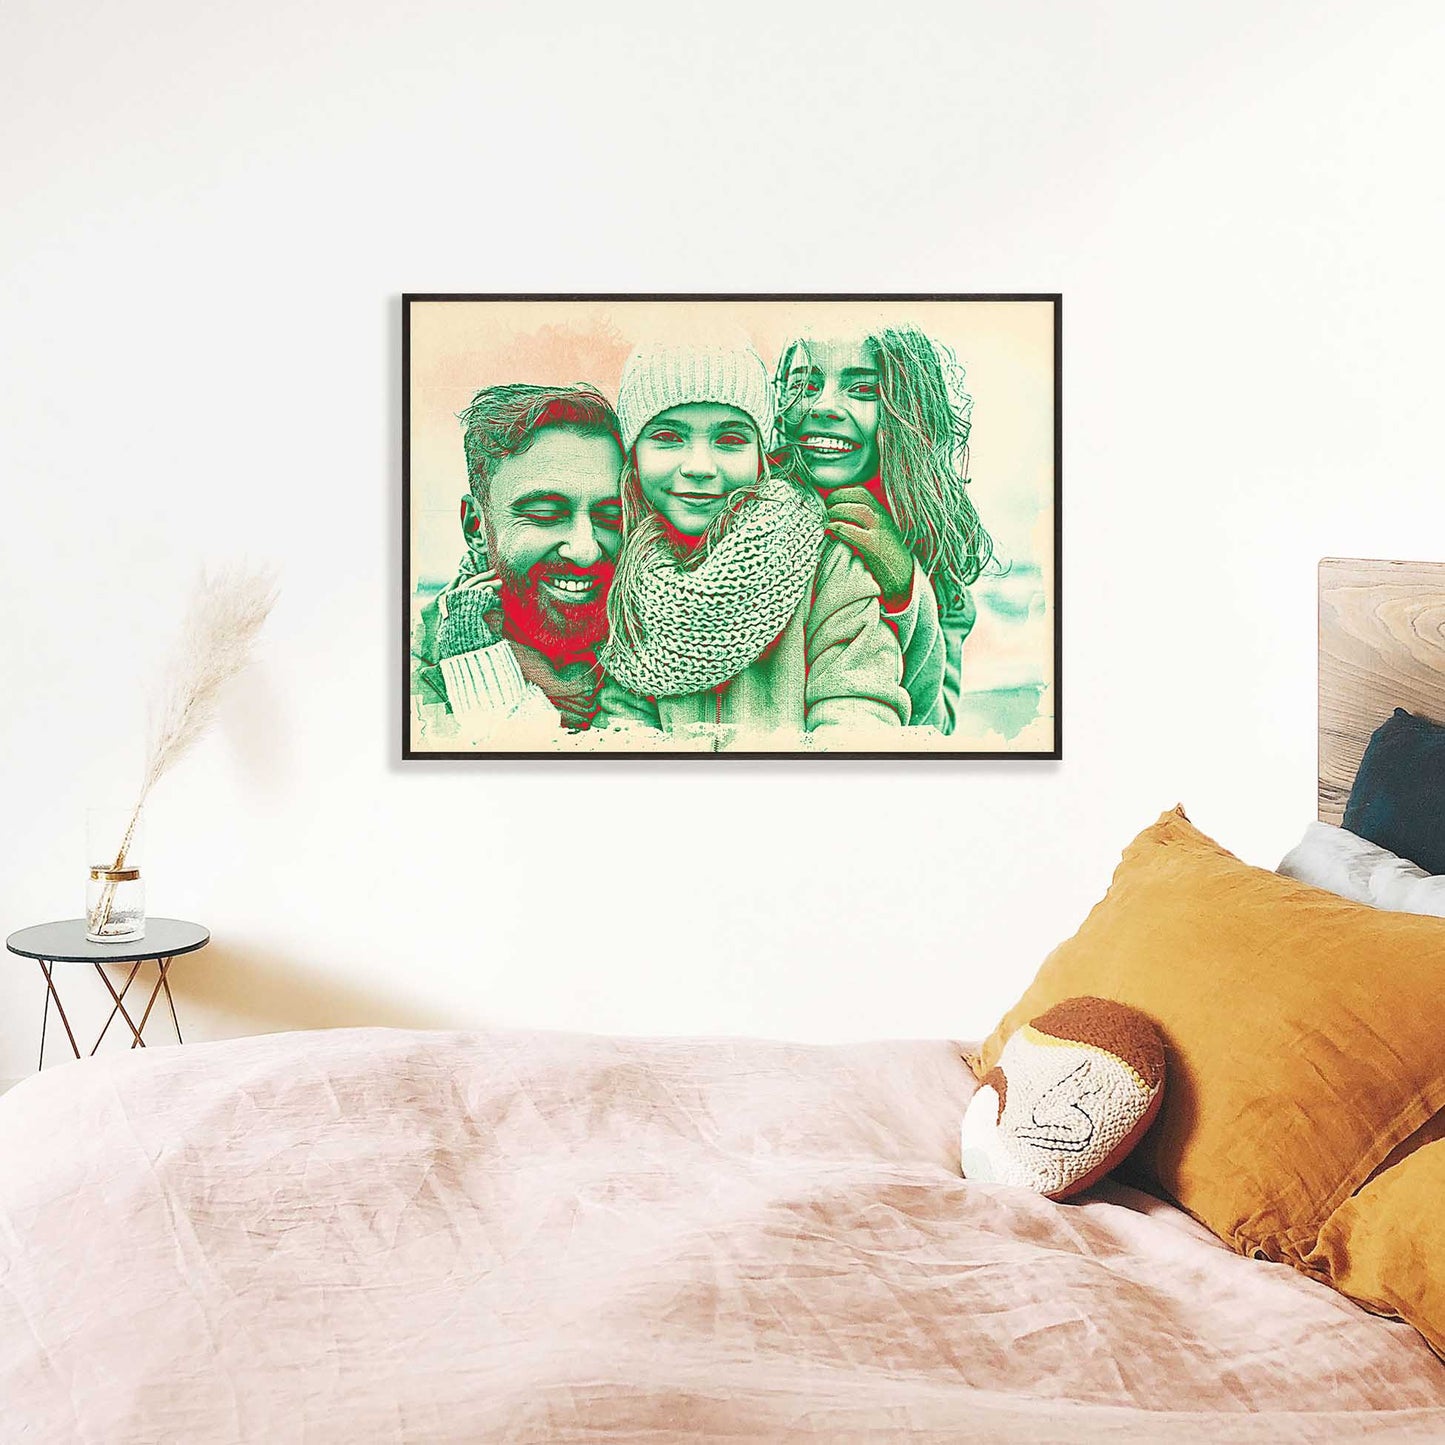 Captivating Interior Design Element: Infuse your space with creativity and beauty through this personalised red and green framed print. Its watercolour style and unique design make it a captivating interior design element